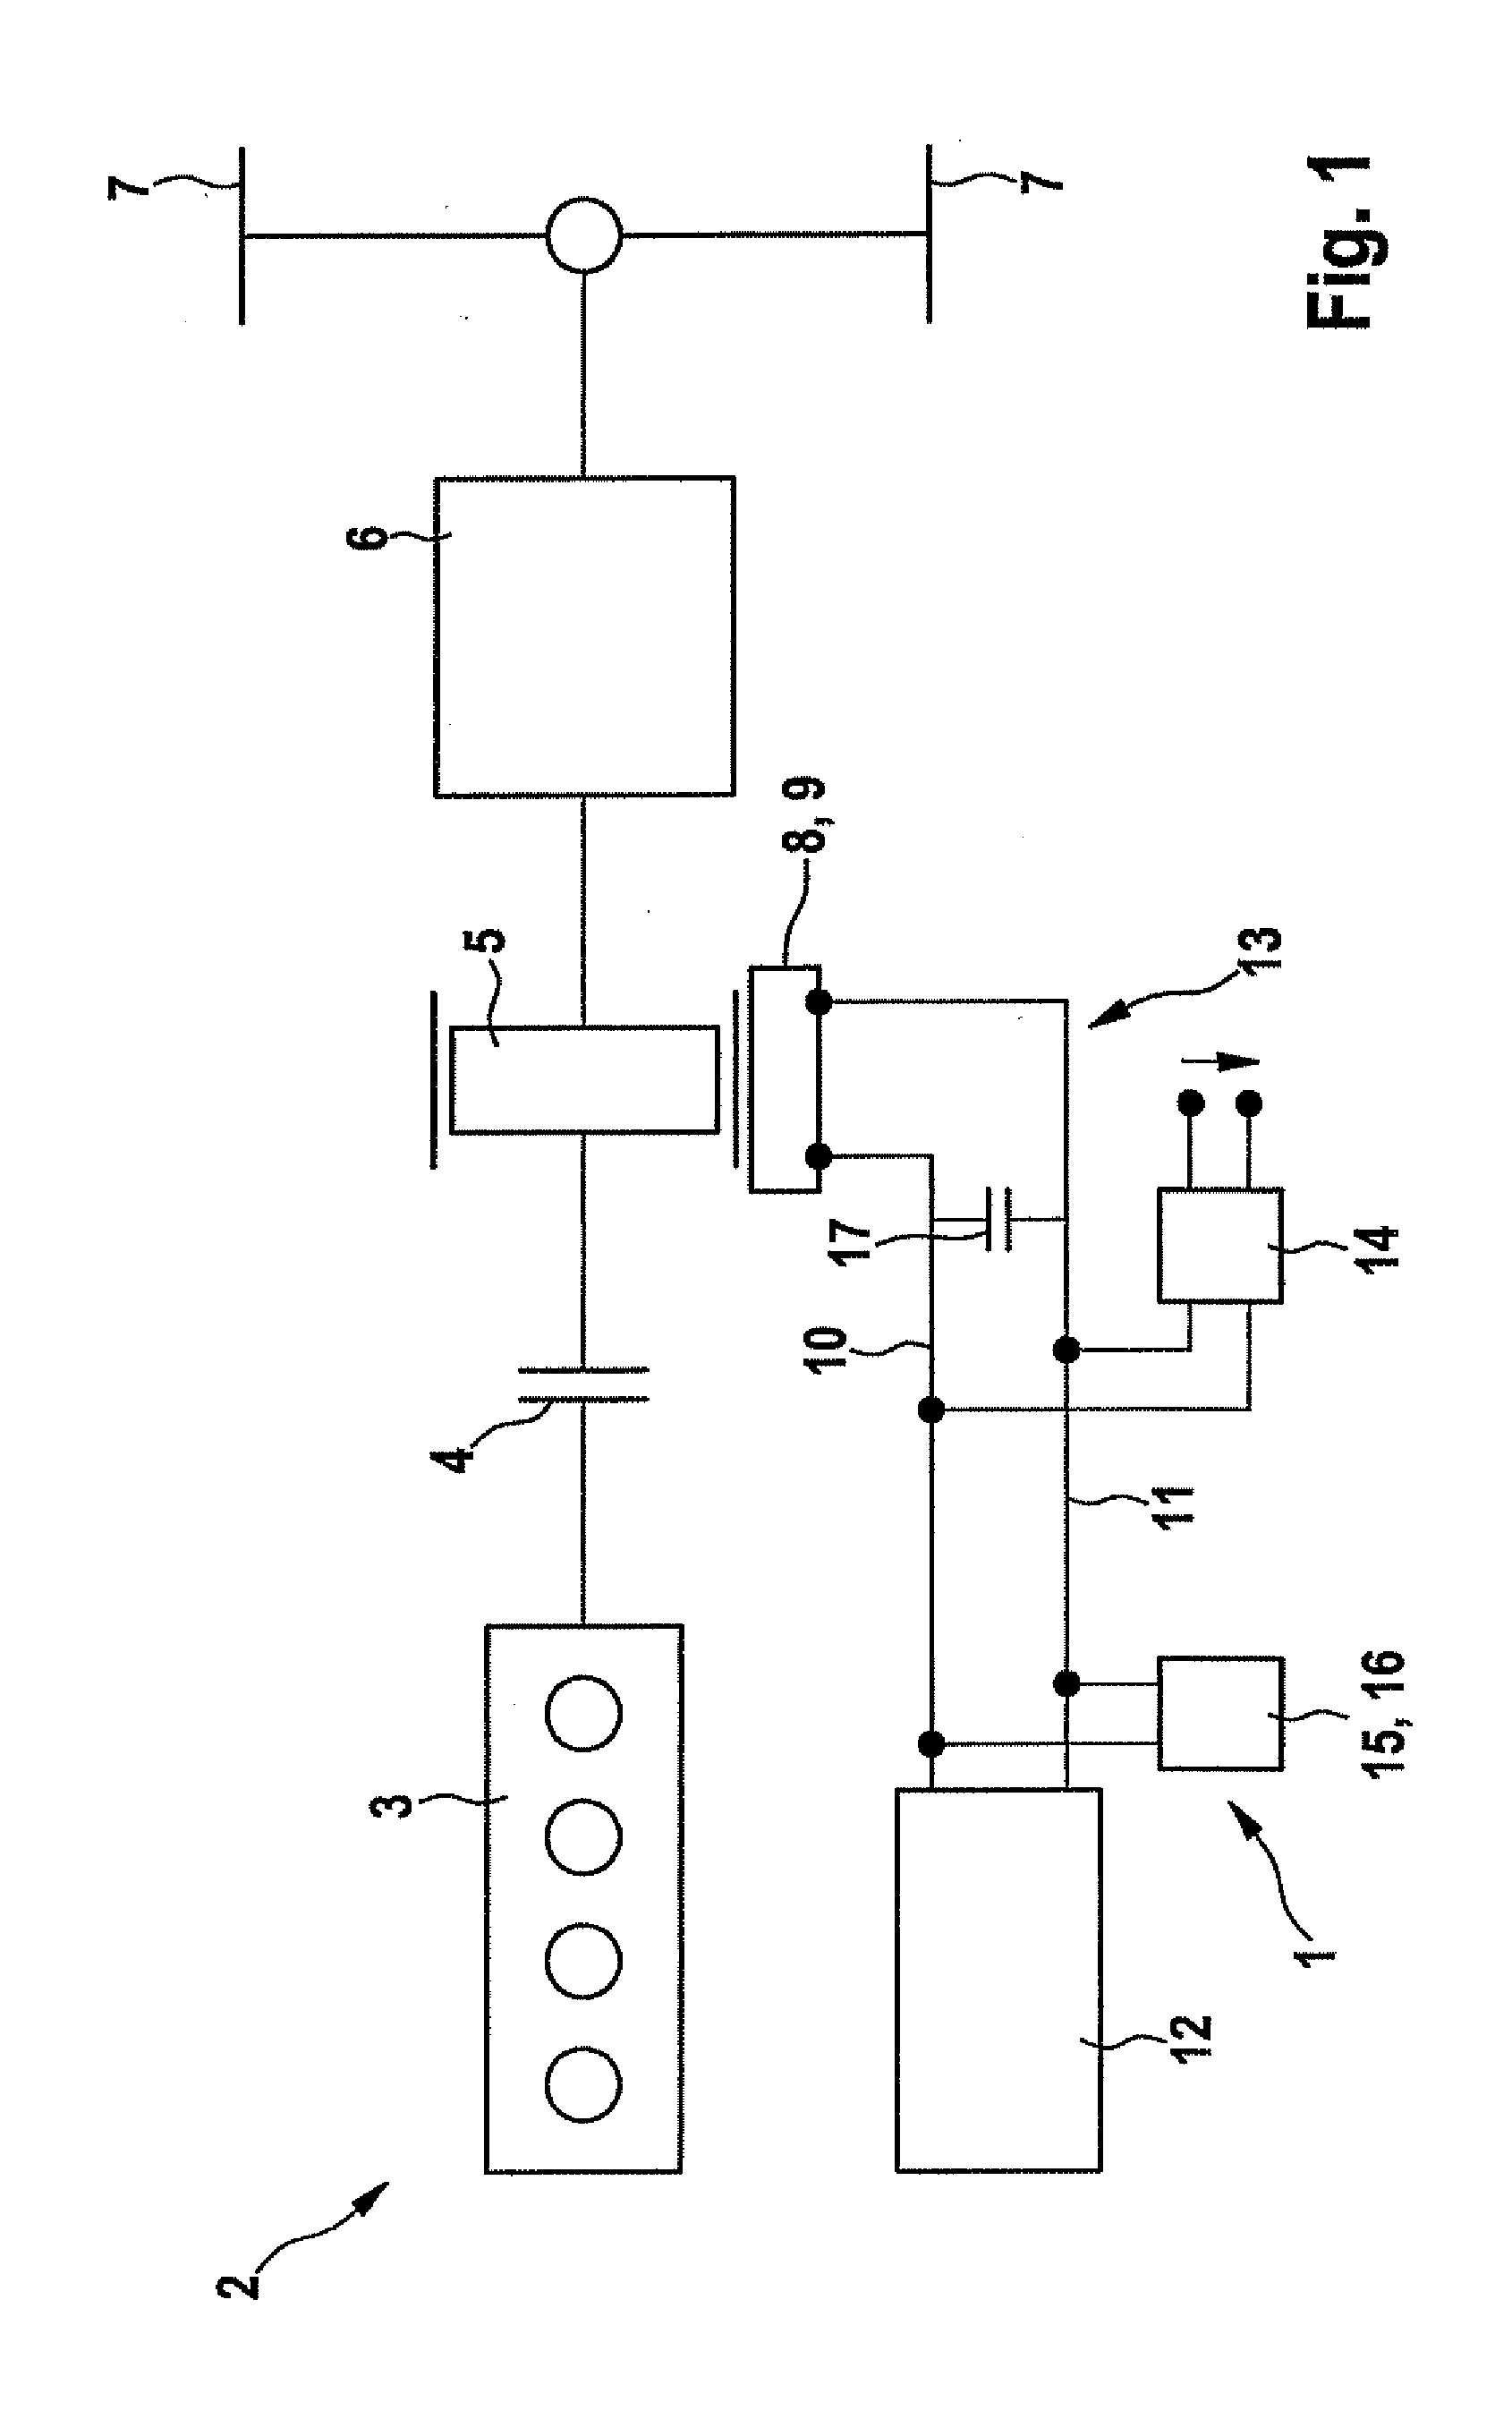 Method for operating an electrical network, in particular of a motor vehicle